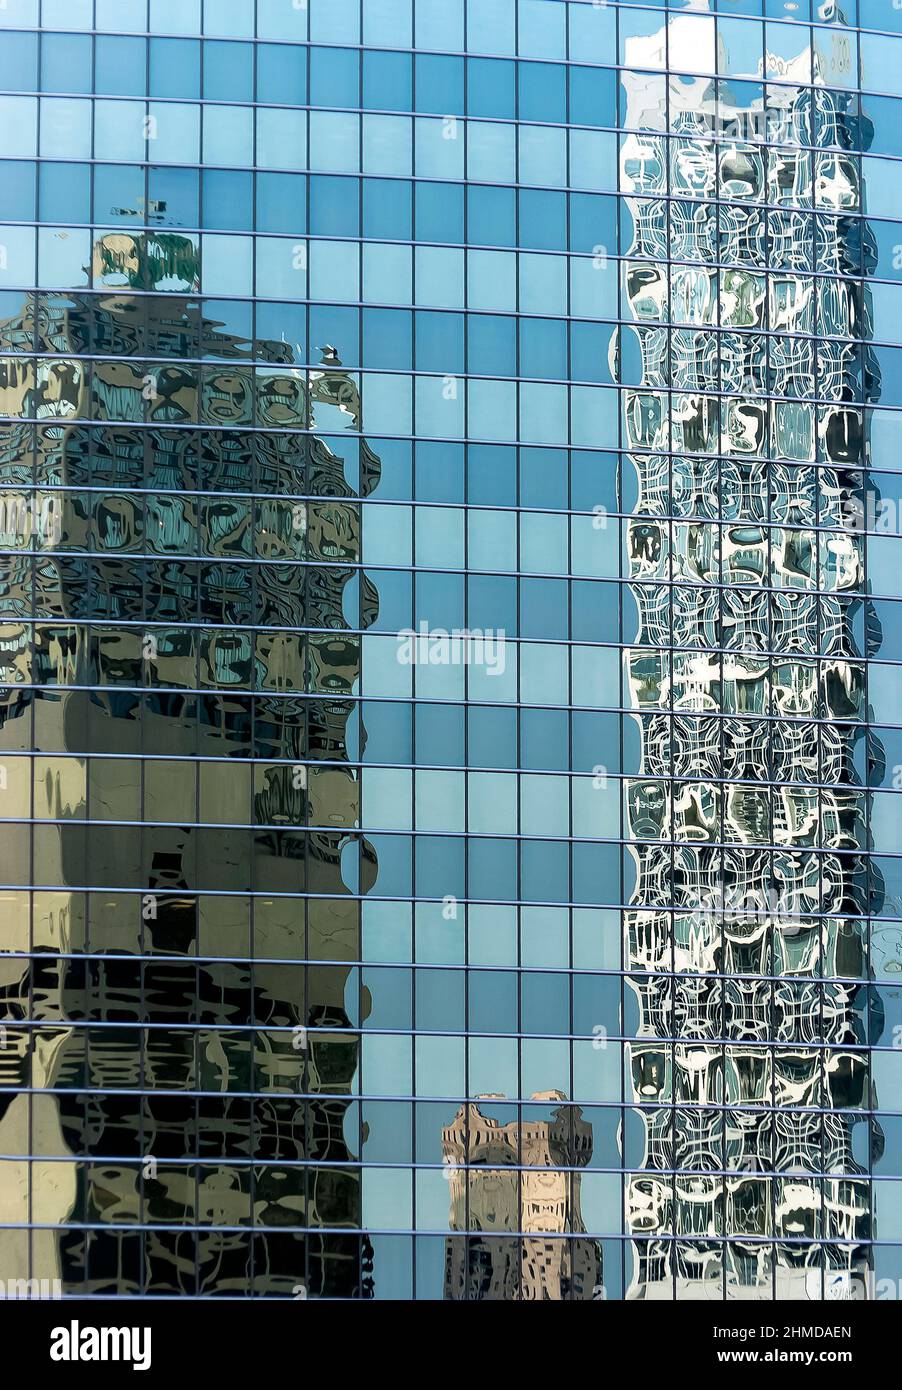 Abstract reflections of buildings in the curved green glass façade of 333 Wacker Drive, Chicago, Illinois Stock Photo